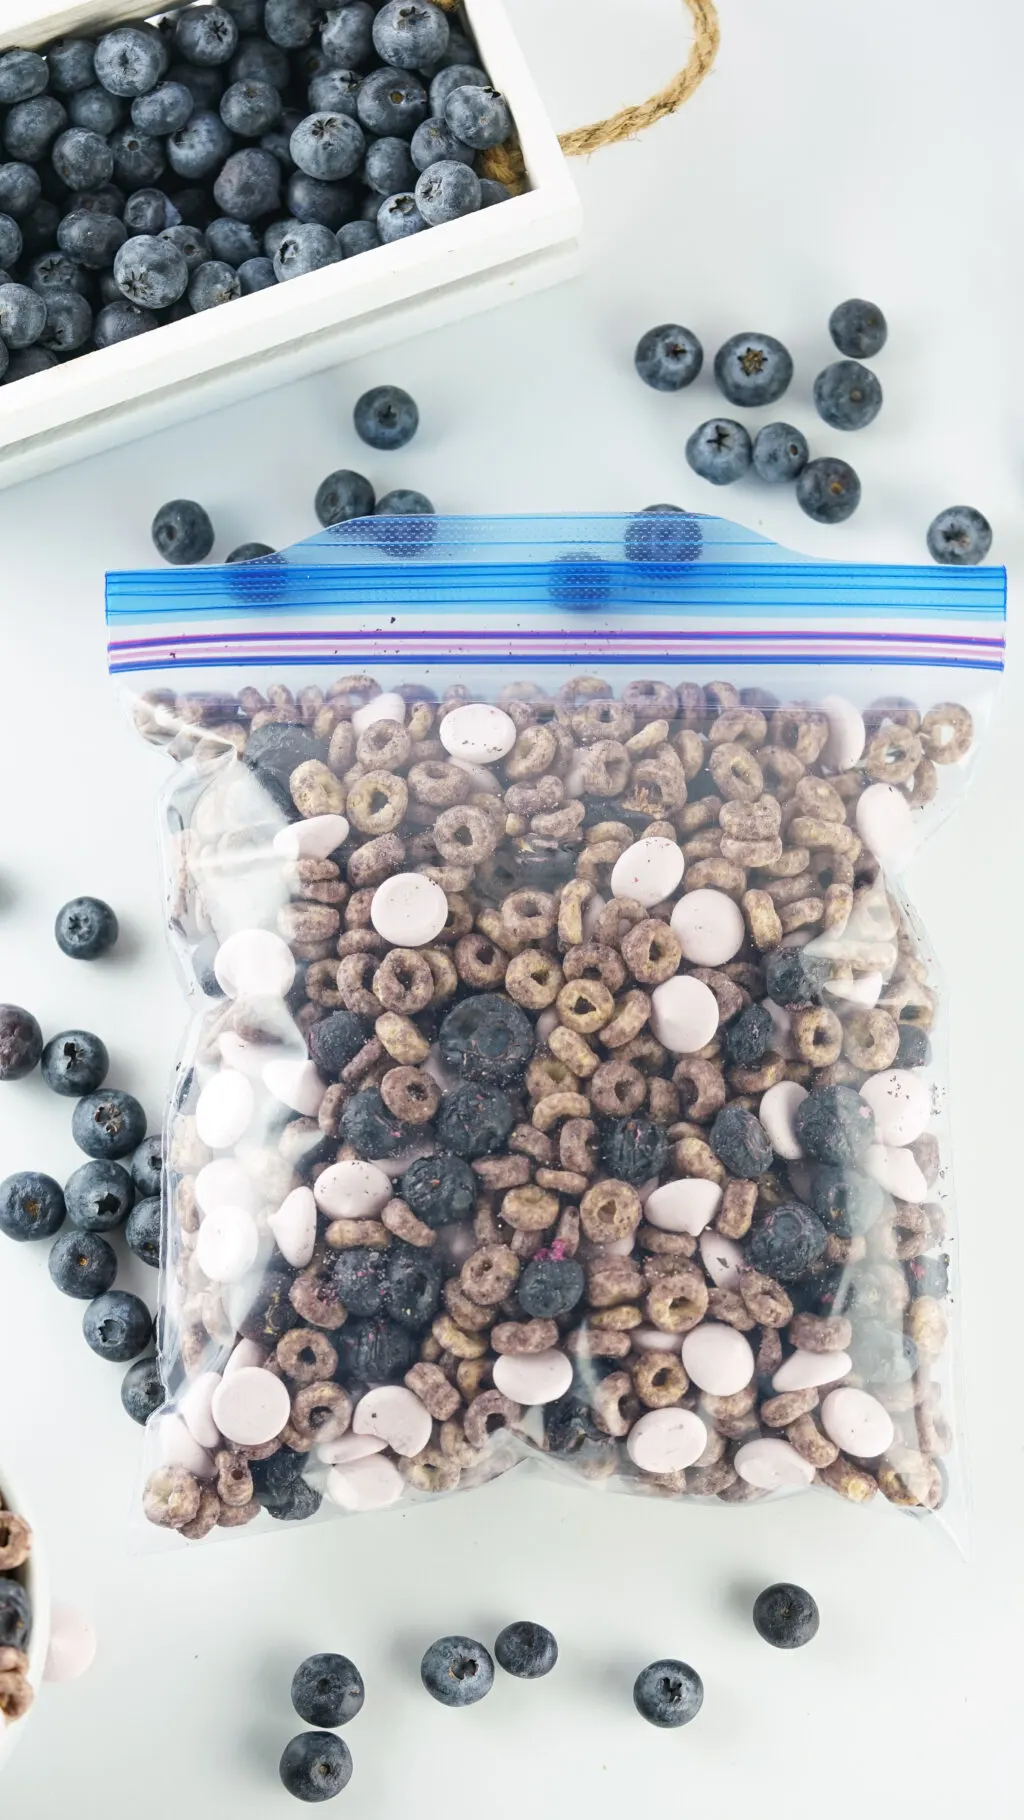 bluberry baby trail mix in large ziploc bag